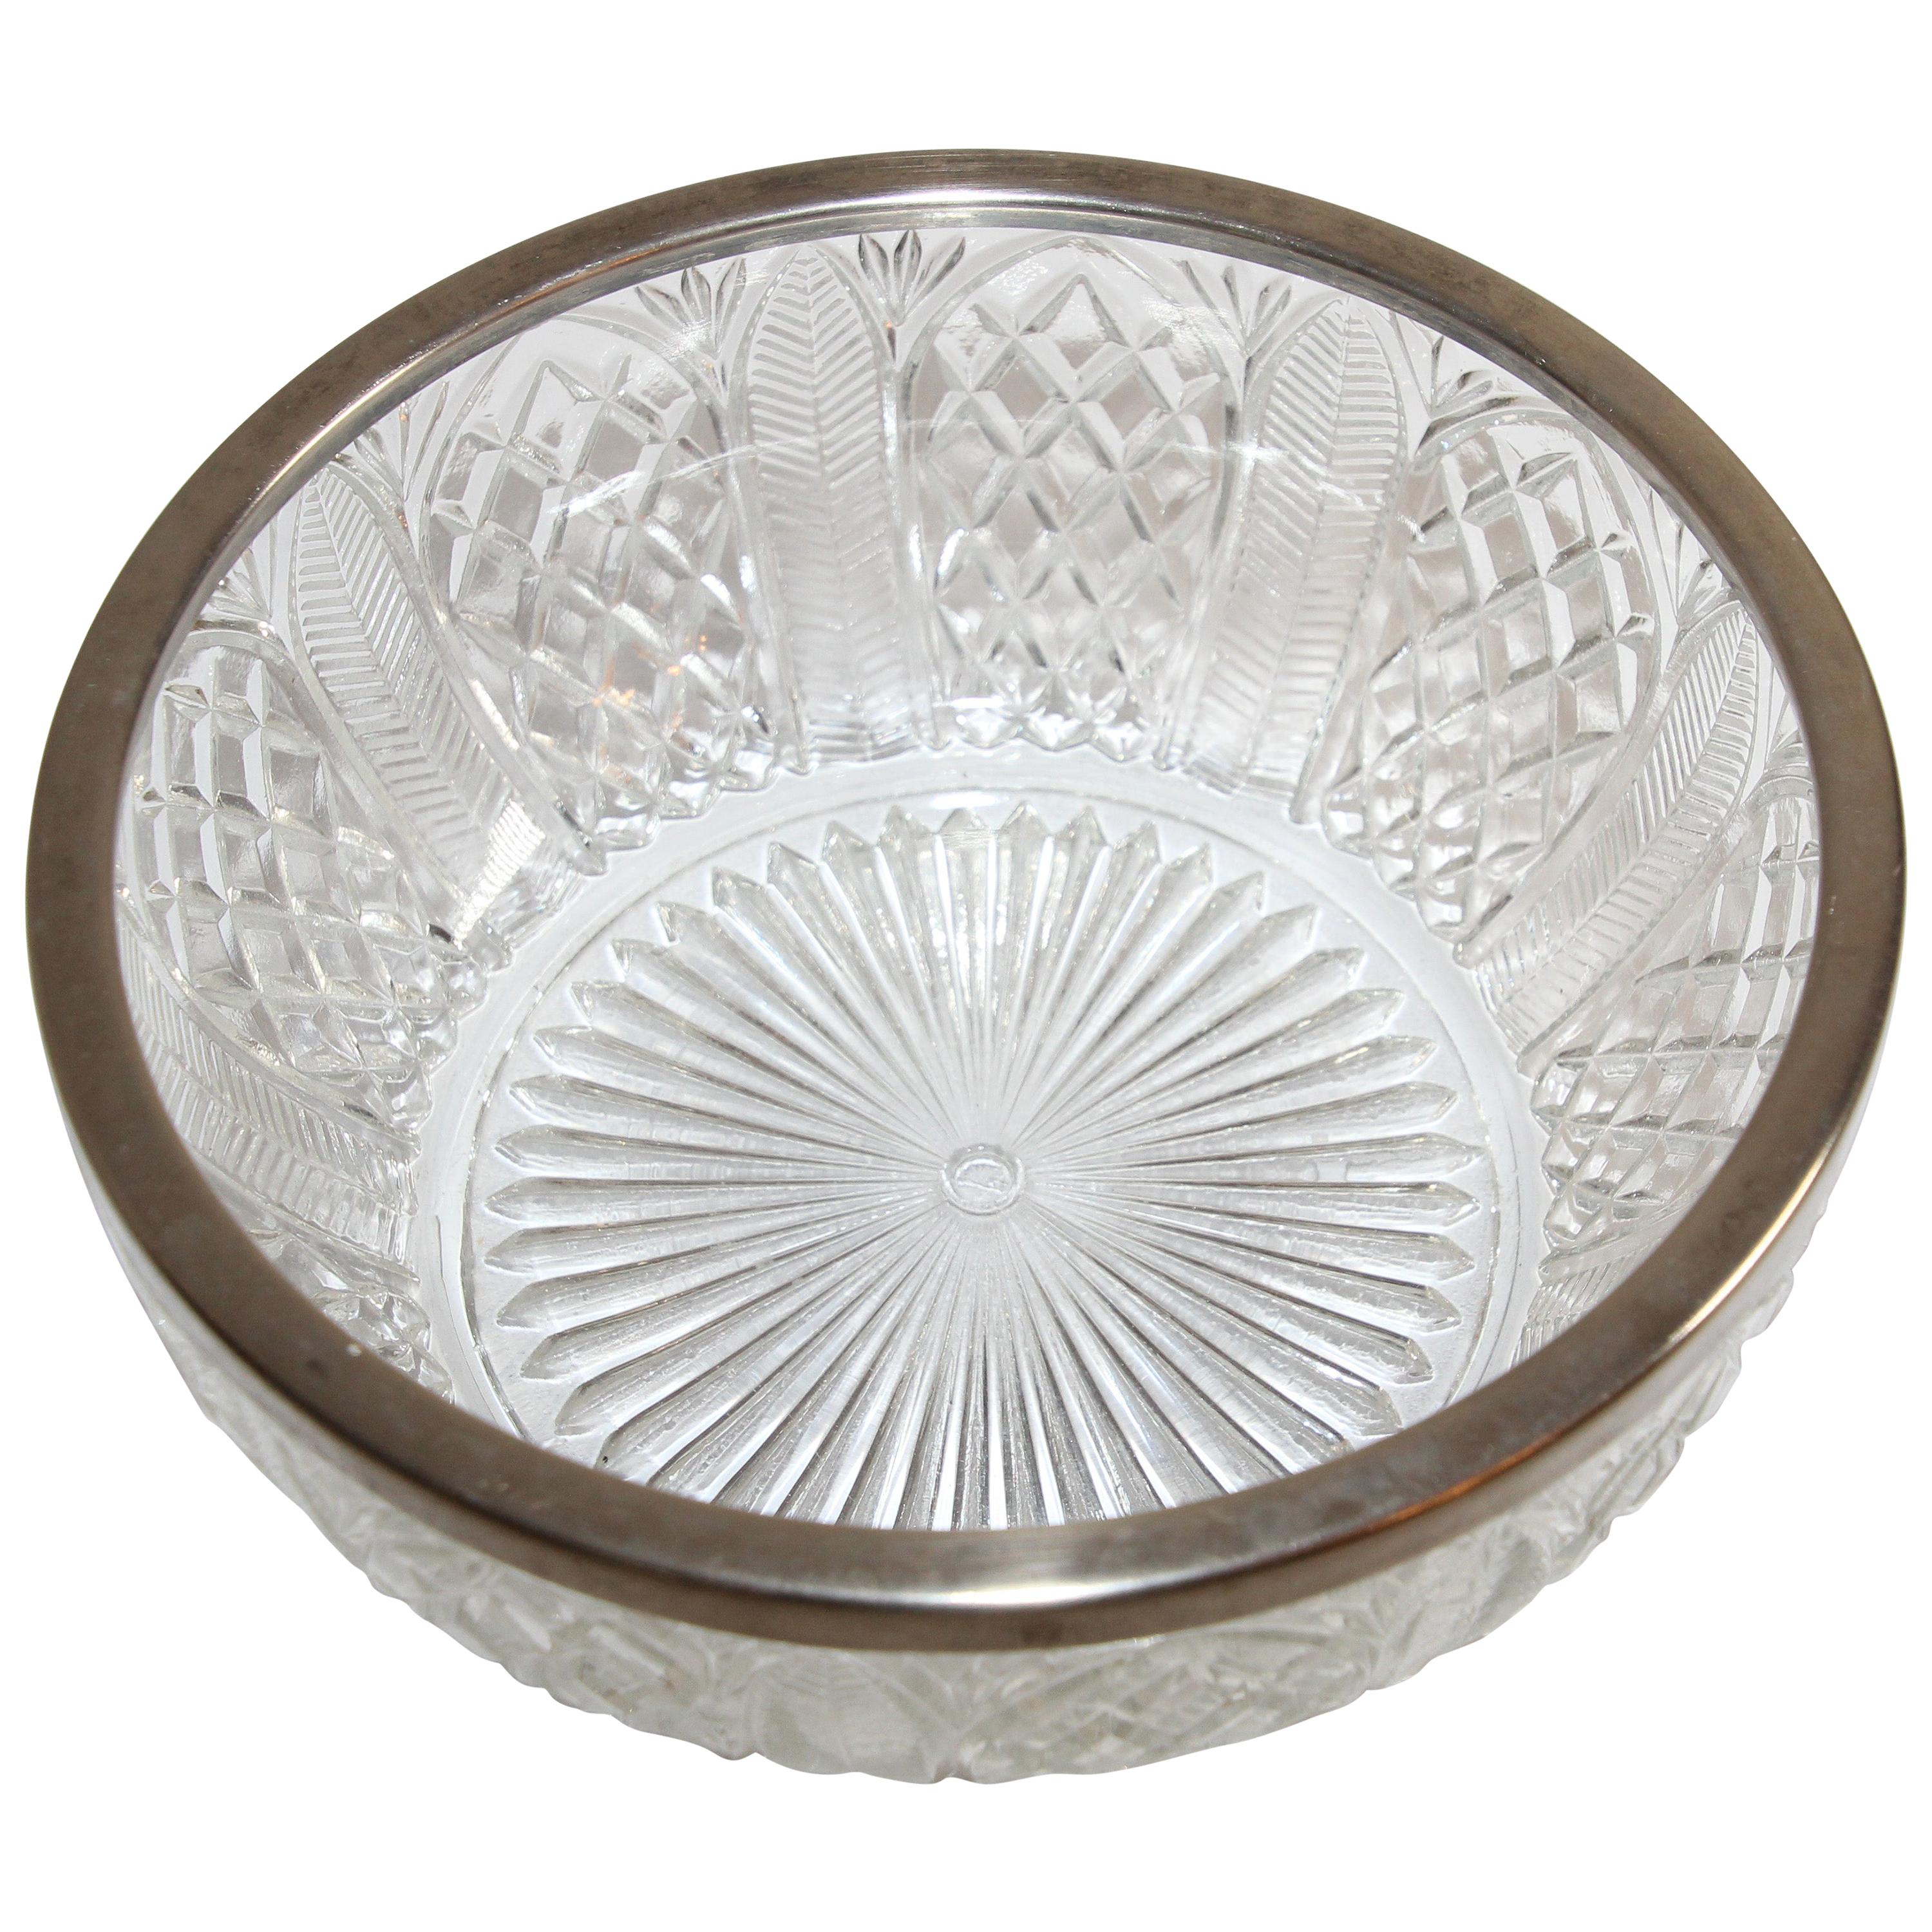 Vintage Large Crystal Bowl with Silver Plated Rim